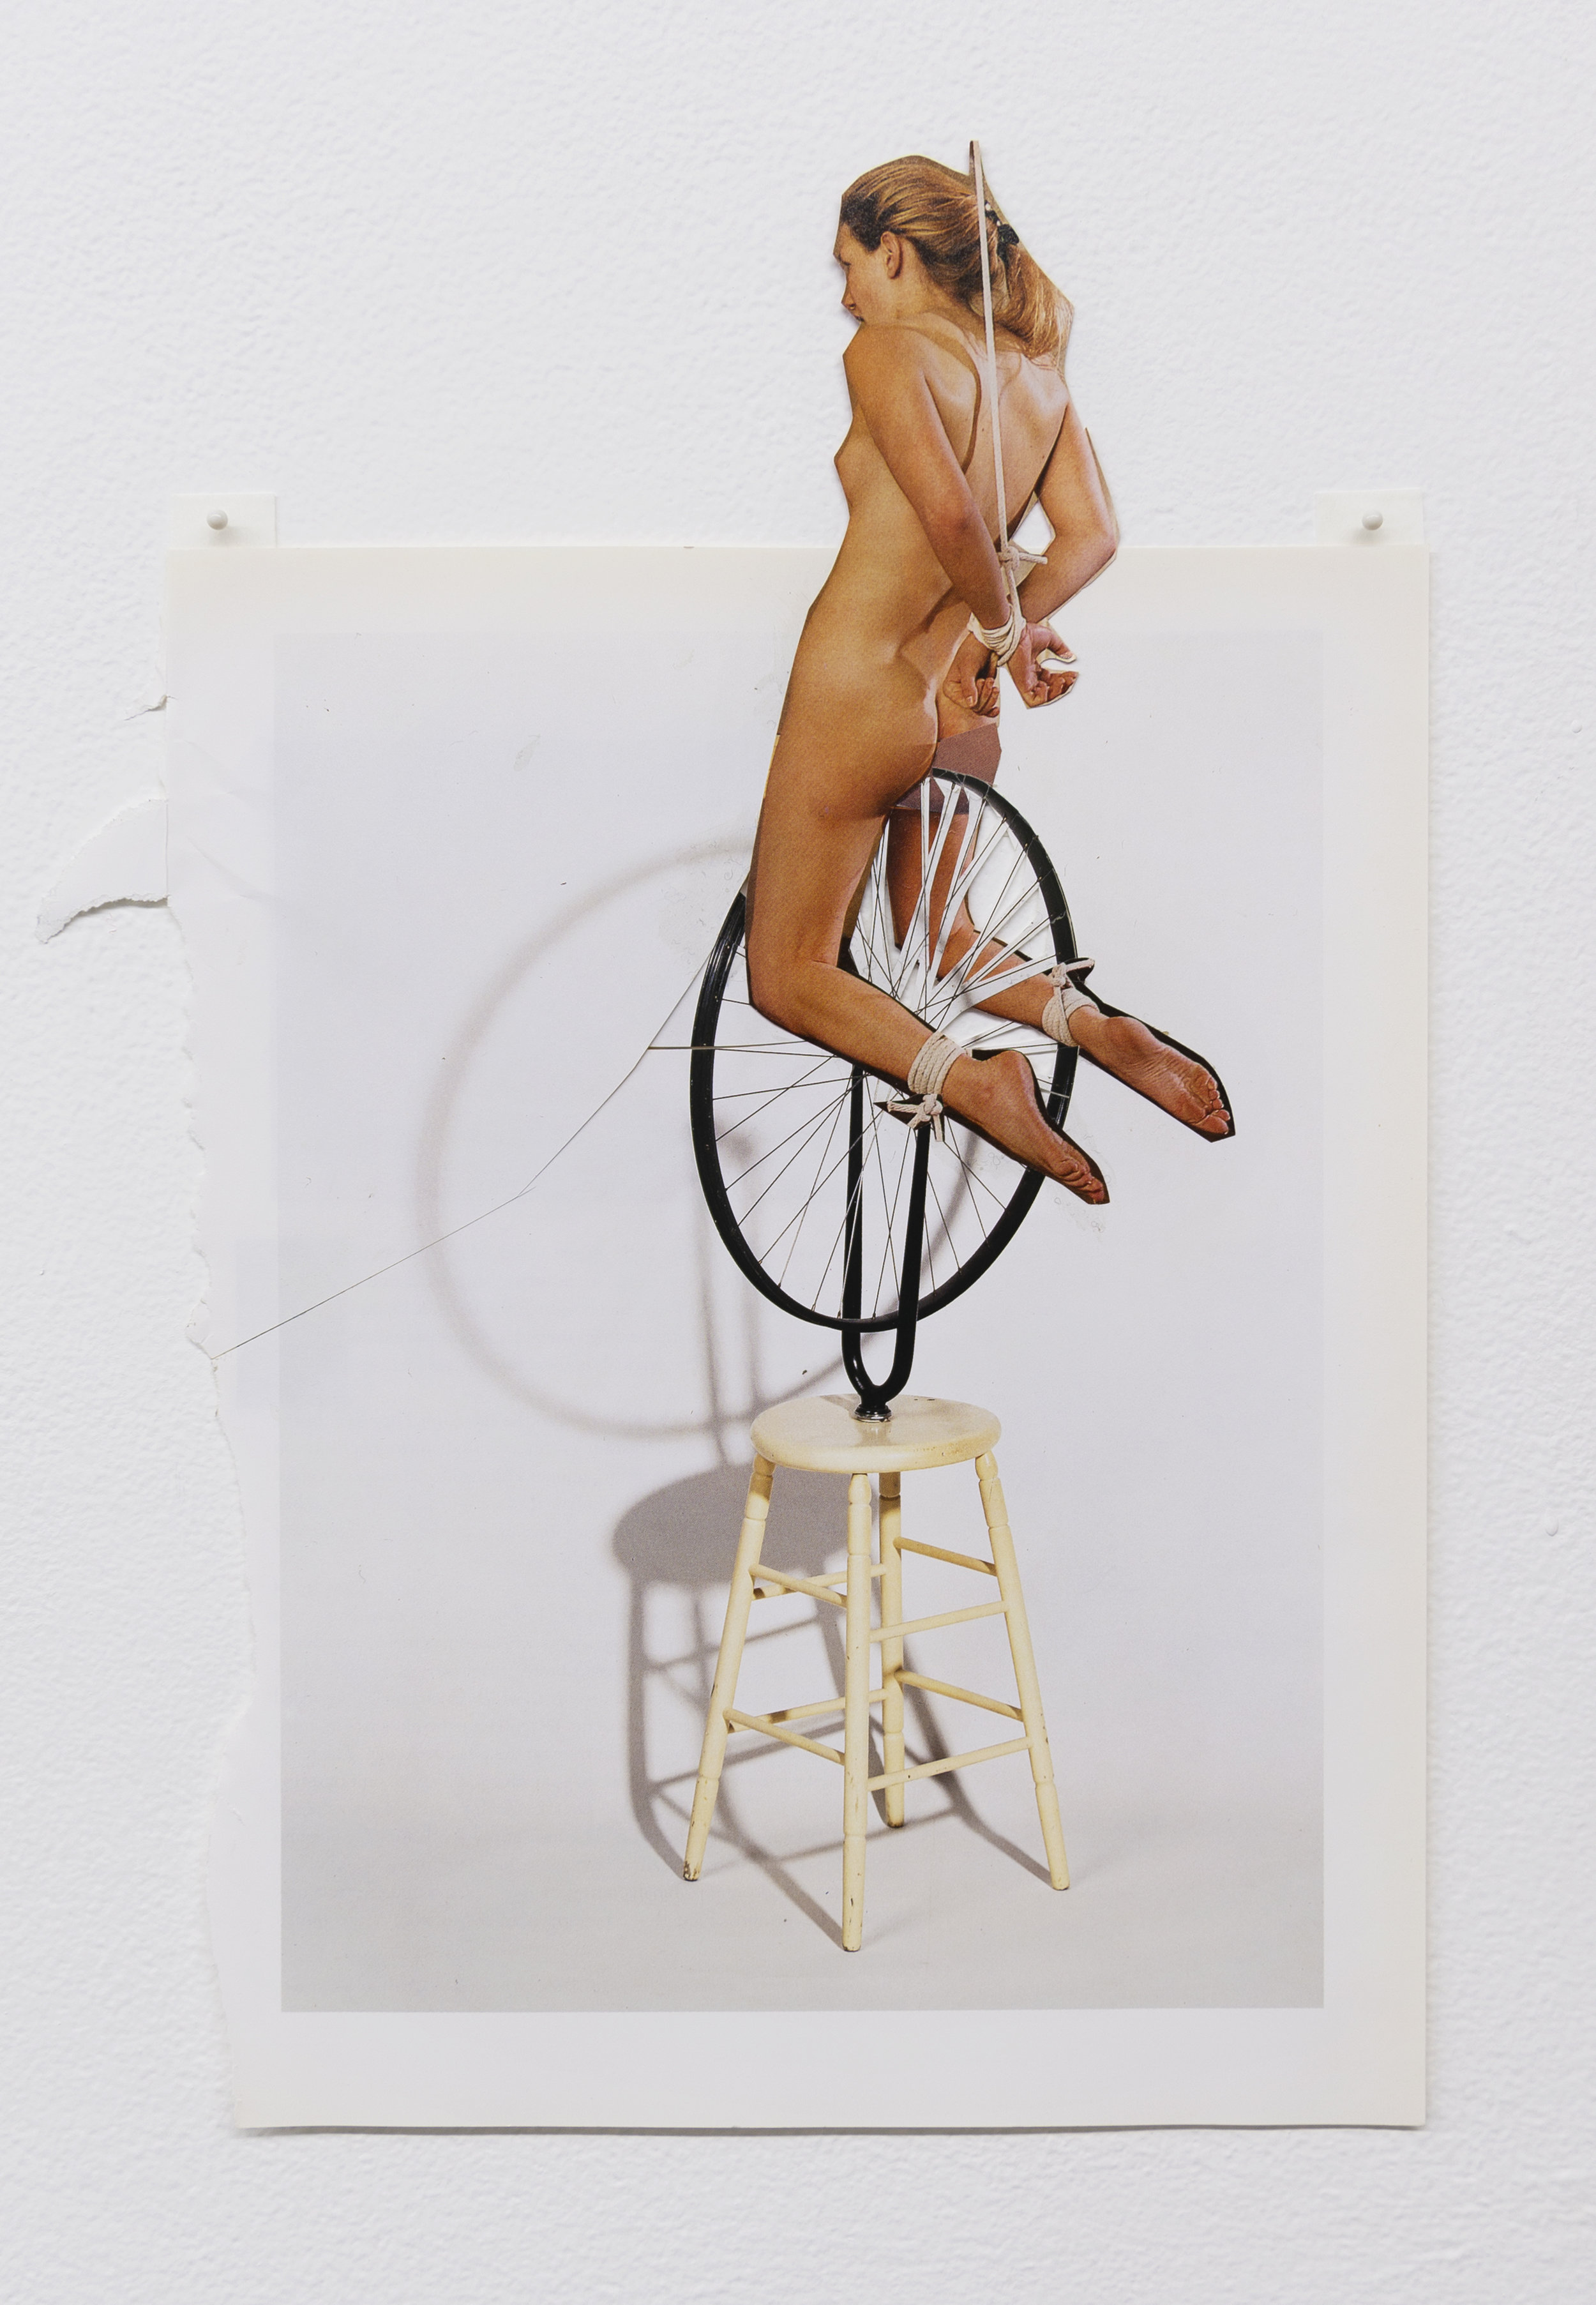  Narcissister,  Studies for Participatory Sculptures, Untitled (Bound to bicycle wheel, after Marcel Duchamp) , 2018, Paper, rubber cement, 14.75 x 10.5 in 